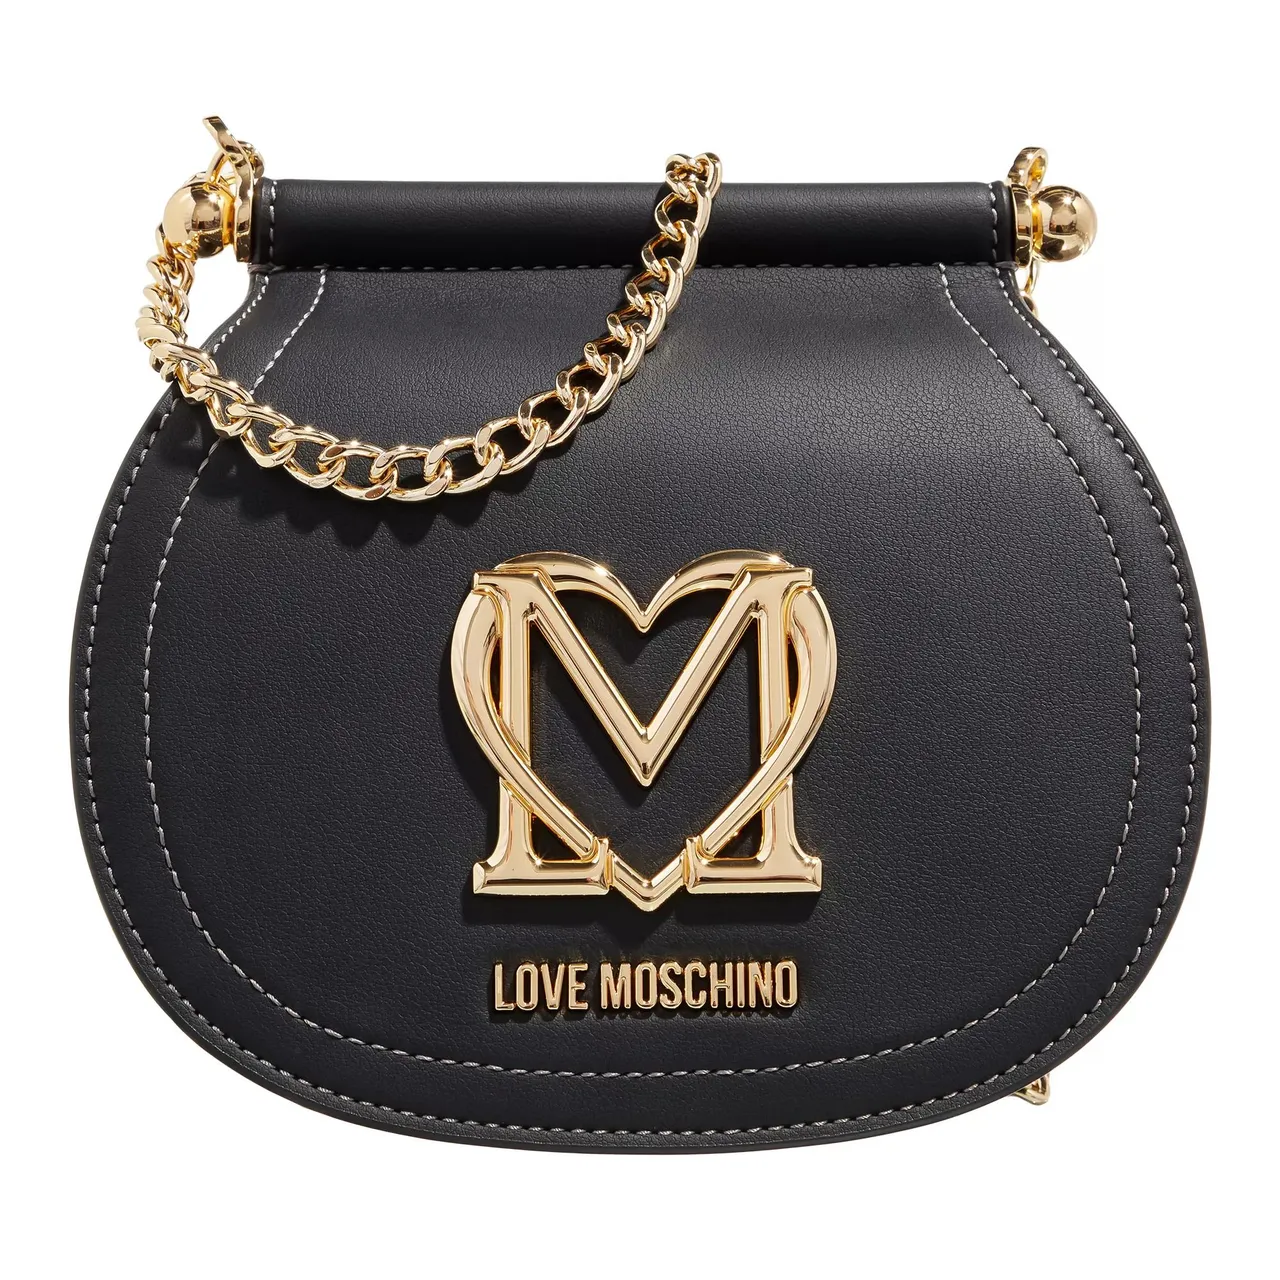 Love Moschino Crossbody Bags - Super Gold - black - Crossbody Bags for ladies